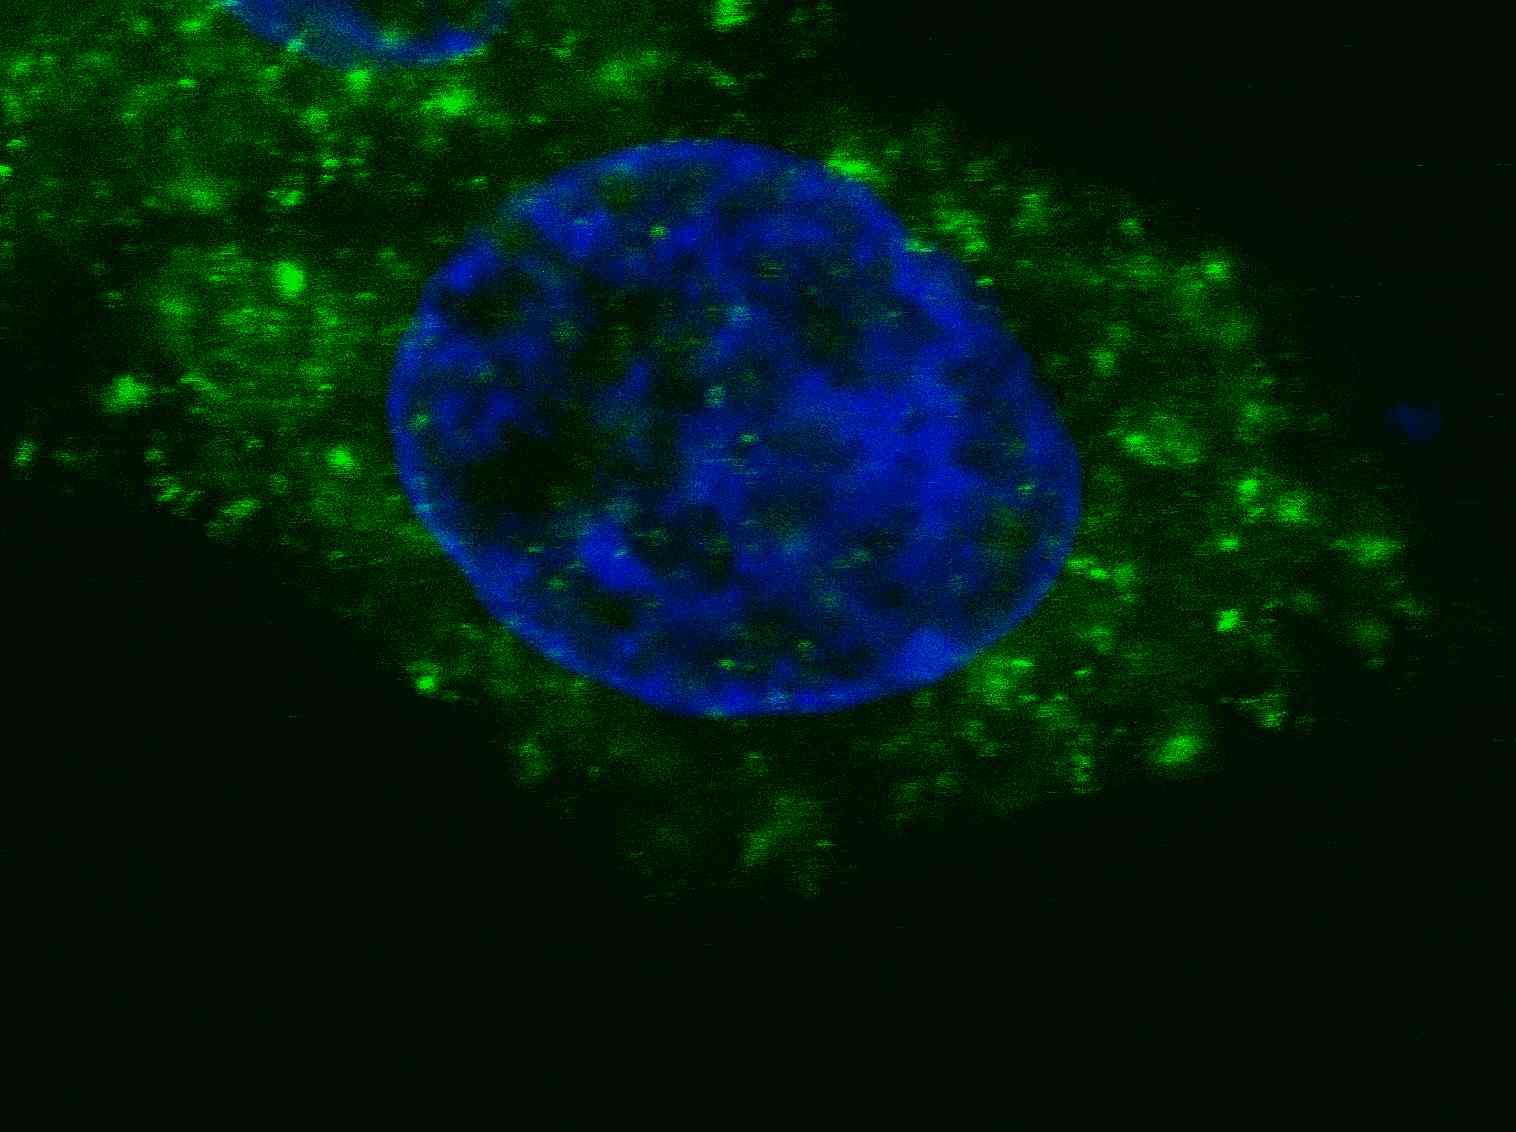 Fluorescent confocal image of HepG2 cells stained with MET/HGFR antibody. HepG2 cells were fixed with 4% PFA (20 min), permeabilized with Triton X-100 (0.2%, 30 min). Cells were then incubated with AM1003a MET/HGFR primary antibody (1:200, 2 h at room temperature). For secondary antibody, Alexa Fluor® 488 conjugated donkey anti-mouse antibody (green) was used (1:1000, 1h). Nuclei were counterstained with Hoechst 33342 (blue) (10 μg/ml, 5 min). Note the highly specific localization of the MET immunosignal to the cytoplasm, supported by Human Protein Atlas Data (http://www.proteinatlas.org/ENSG00000105976).